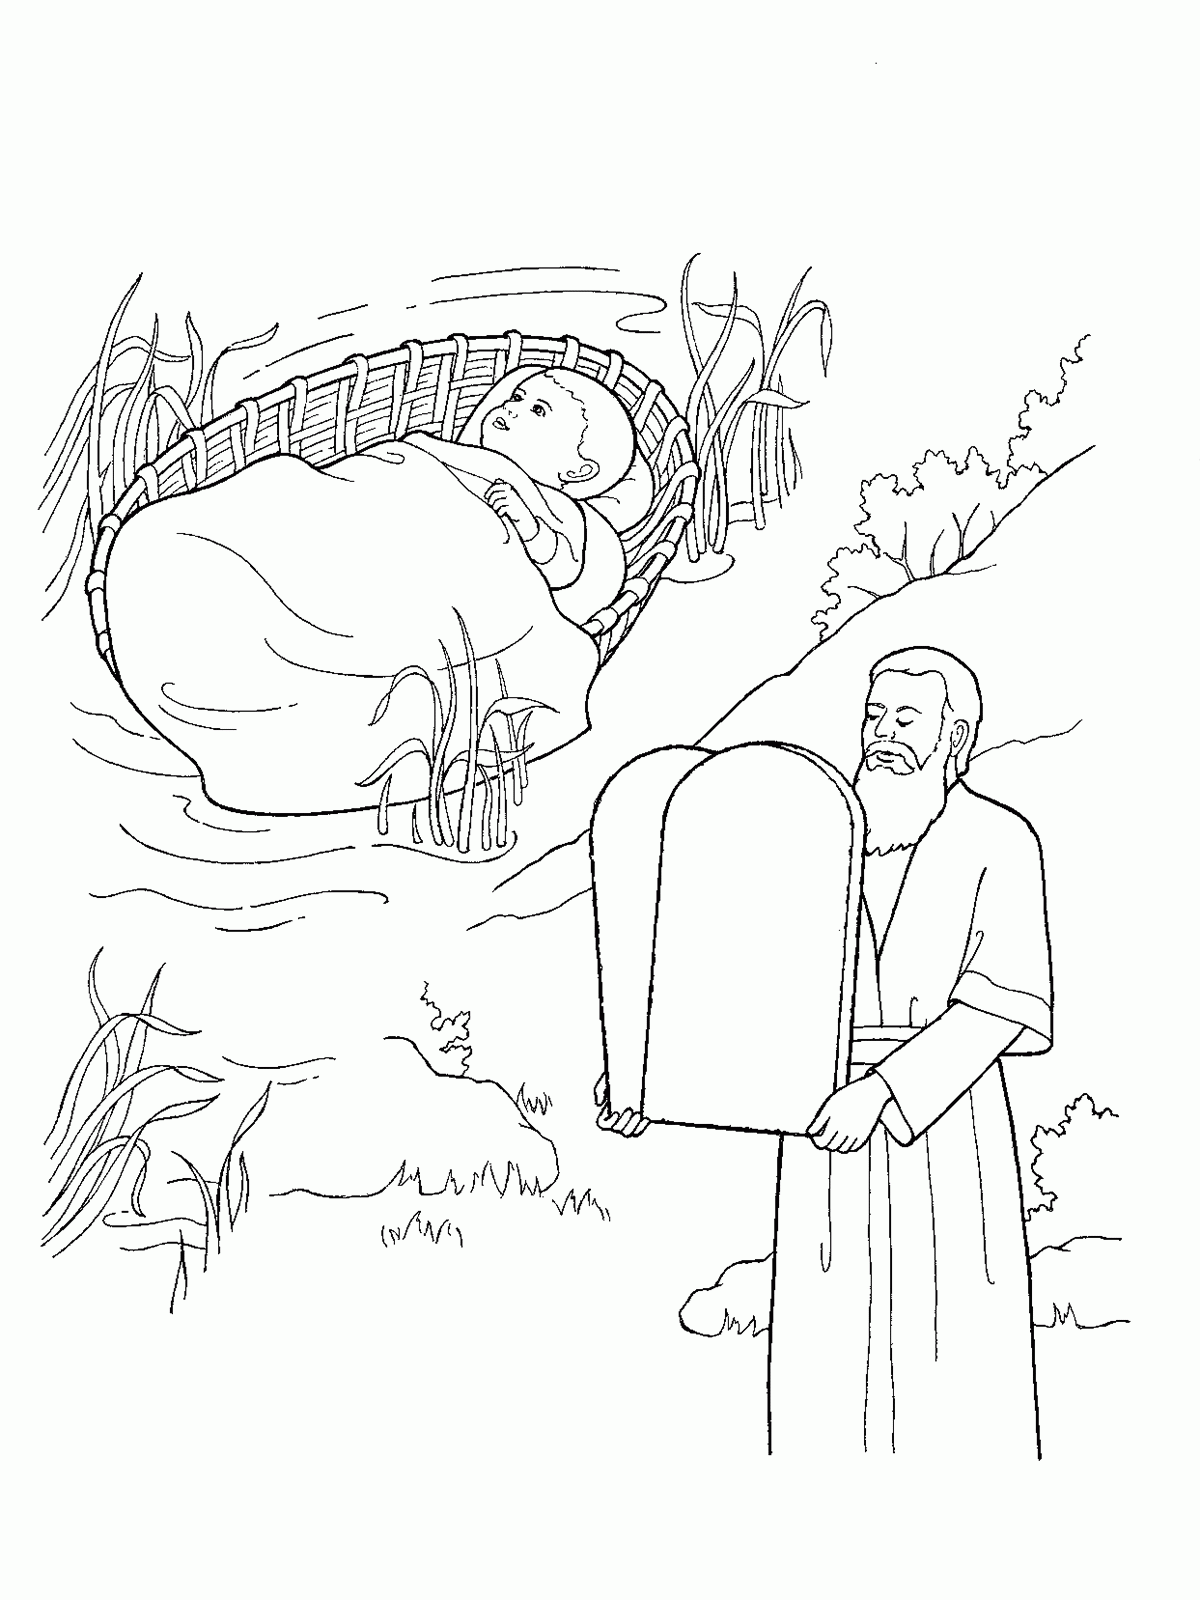 10 Commandments Coloring Page Our Deseret Homeschool August 2014 2021 09 058 Coloring4free